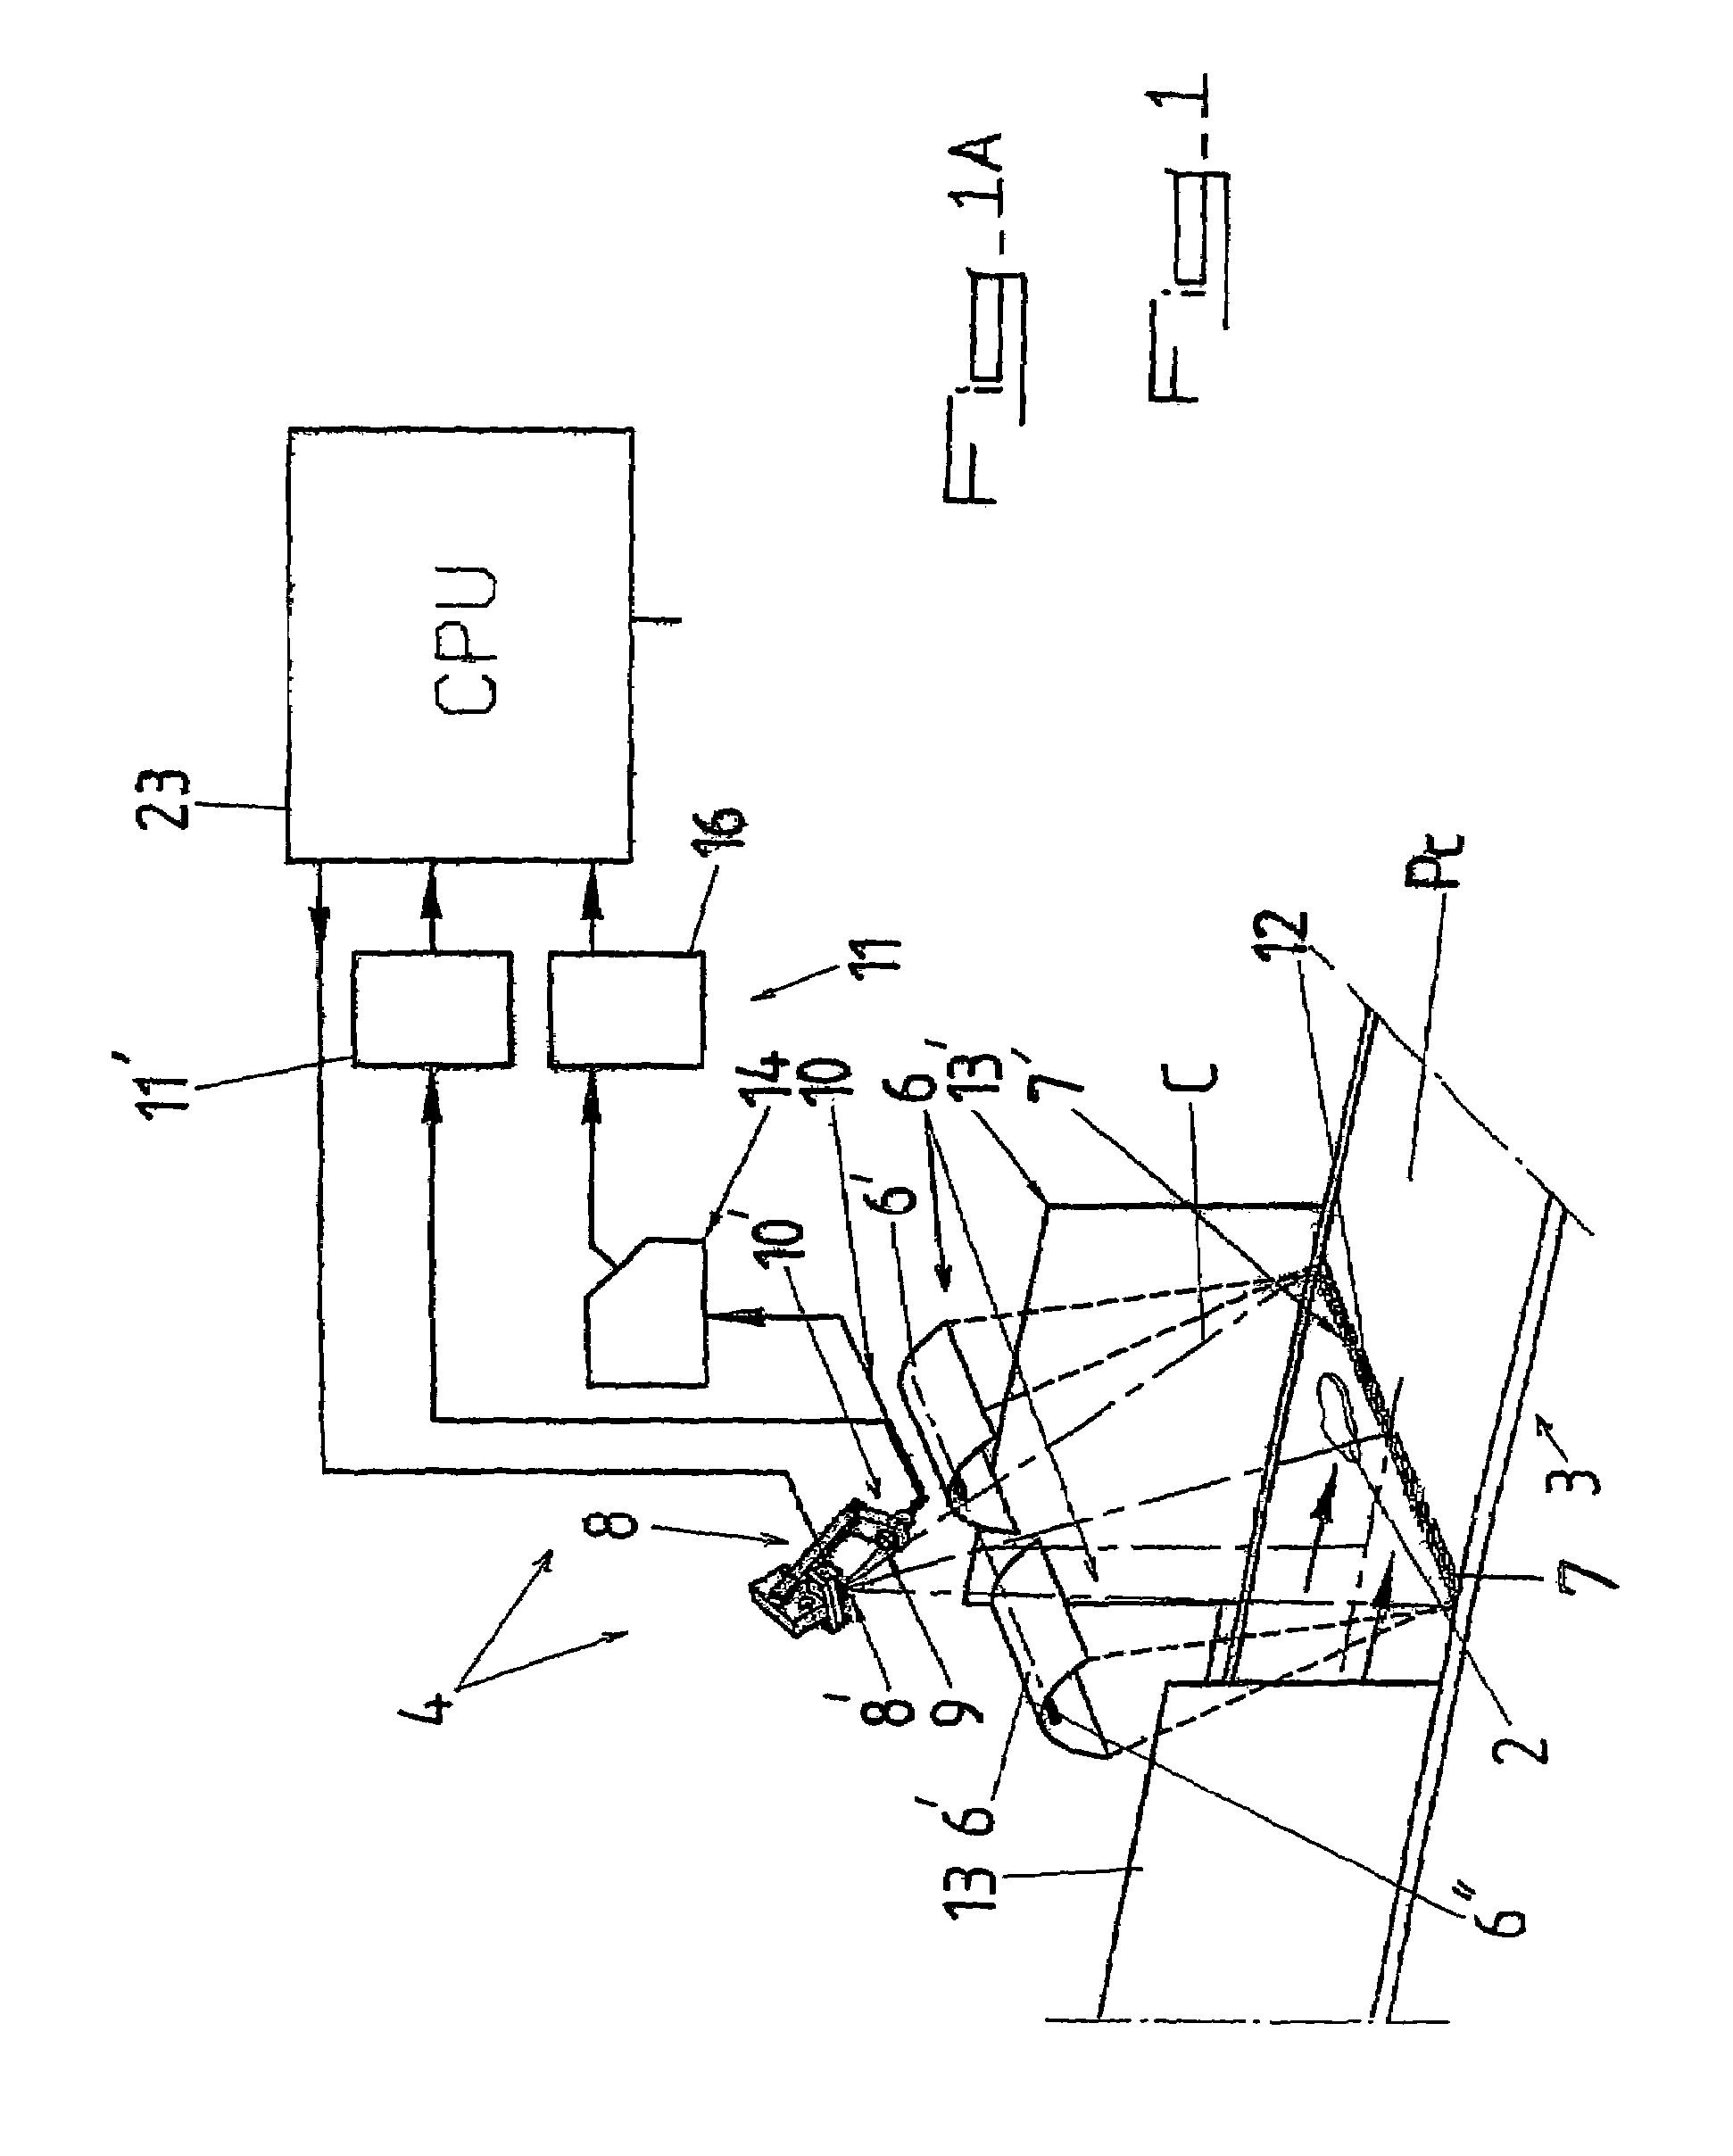 Device and method for automatically inspecting objects traveling in an essentially monolayer flow